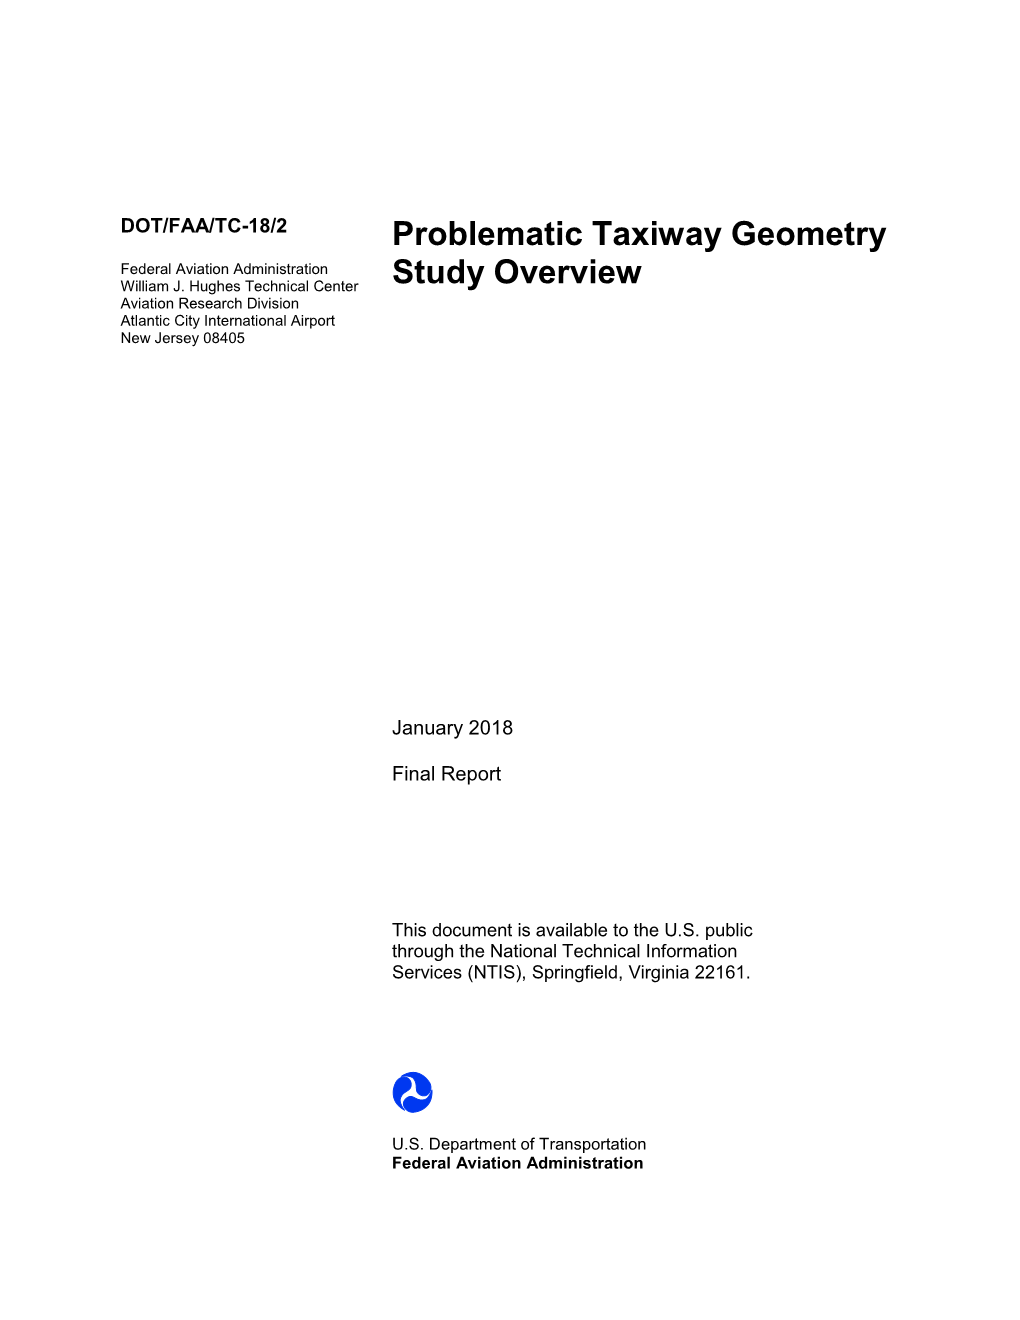 PROBLEMATIC TAXIWAY GEOMETRY STUDY OVERVIEW January 2018 6